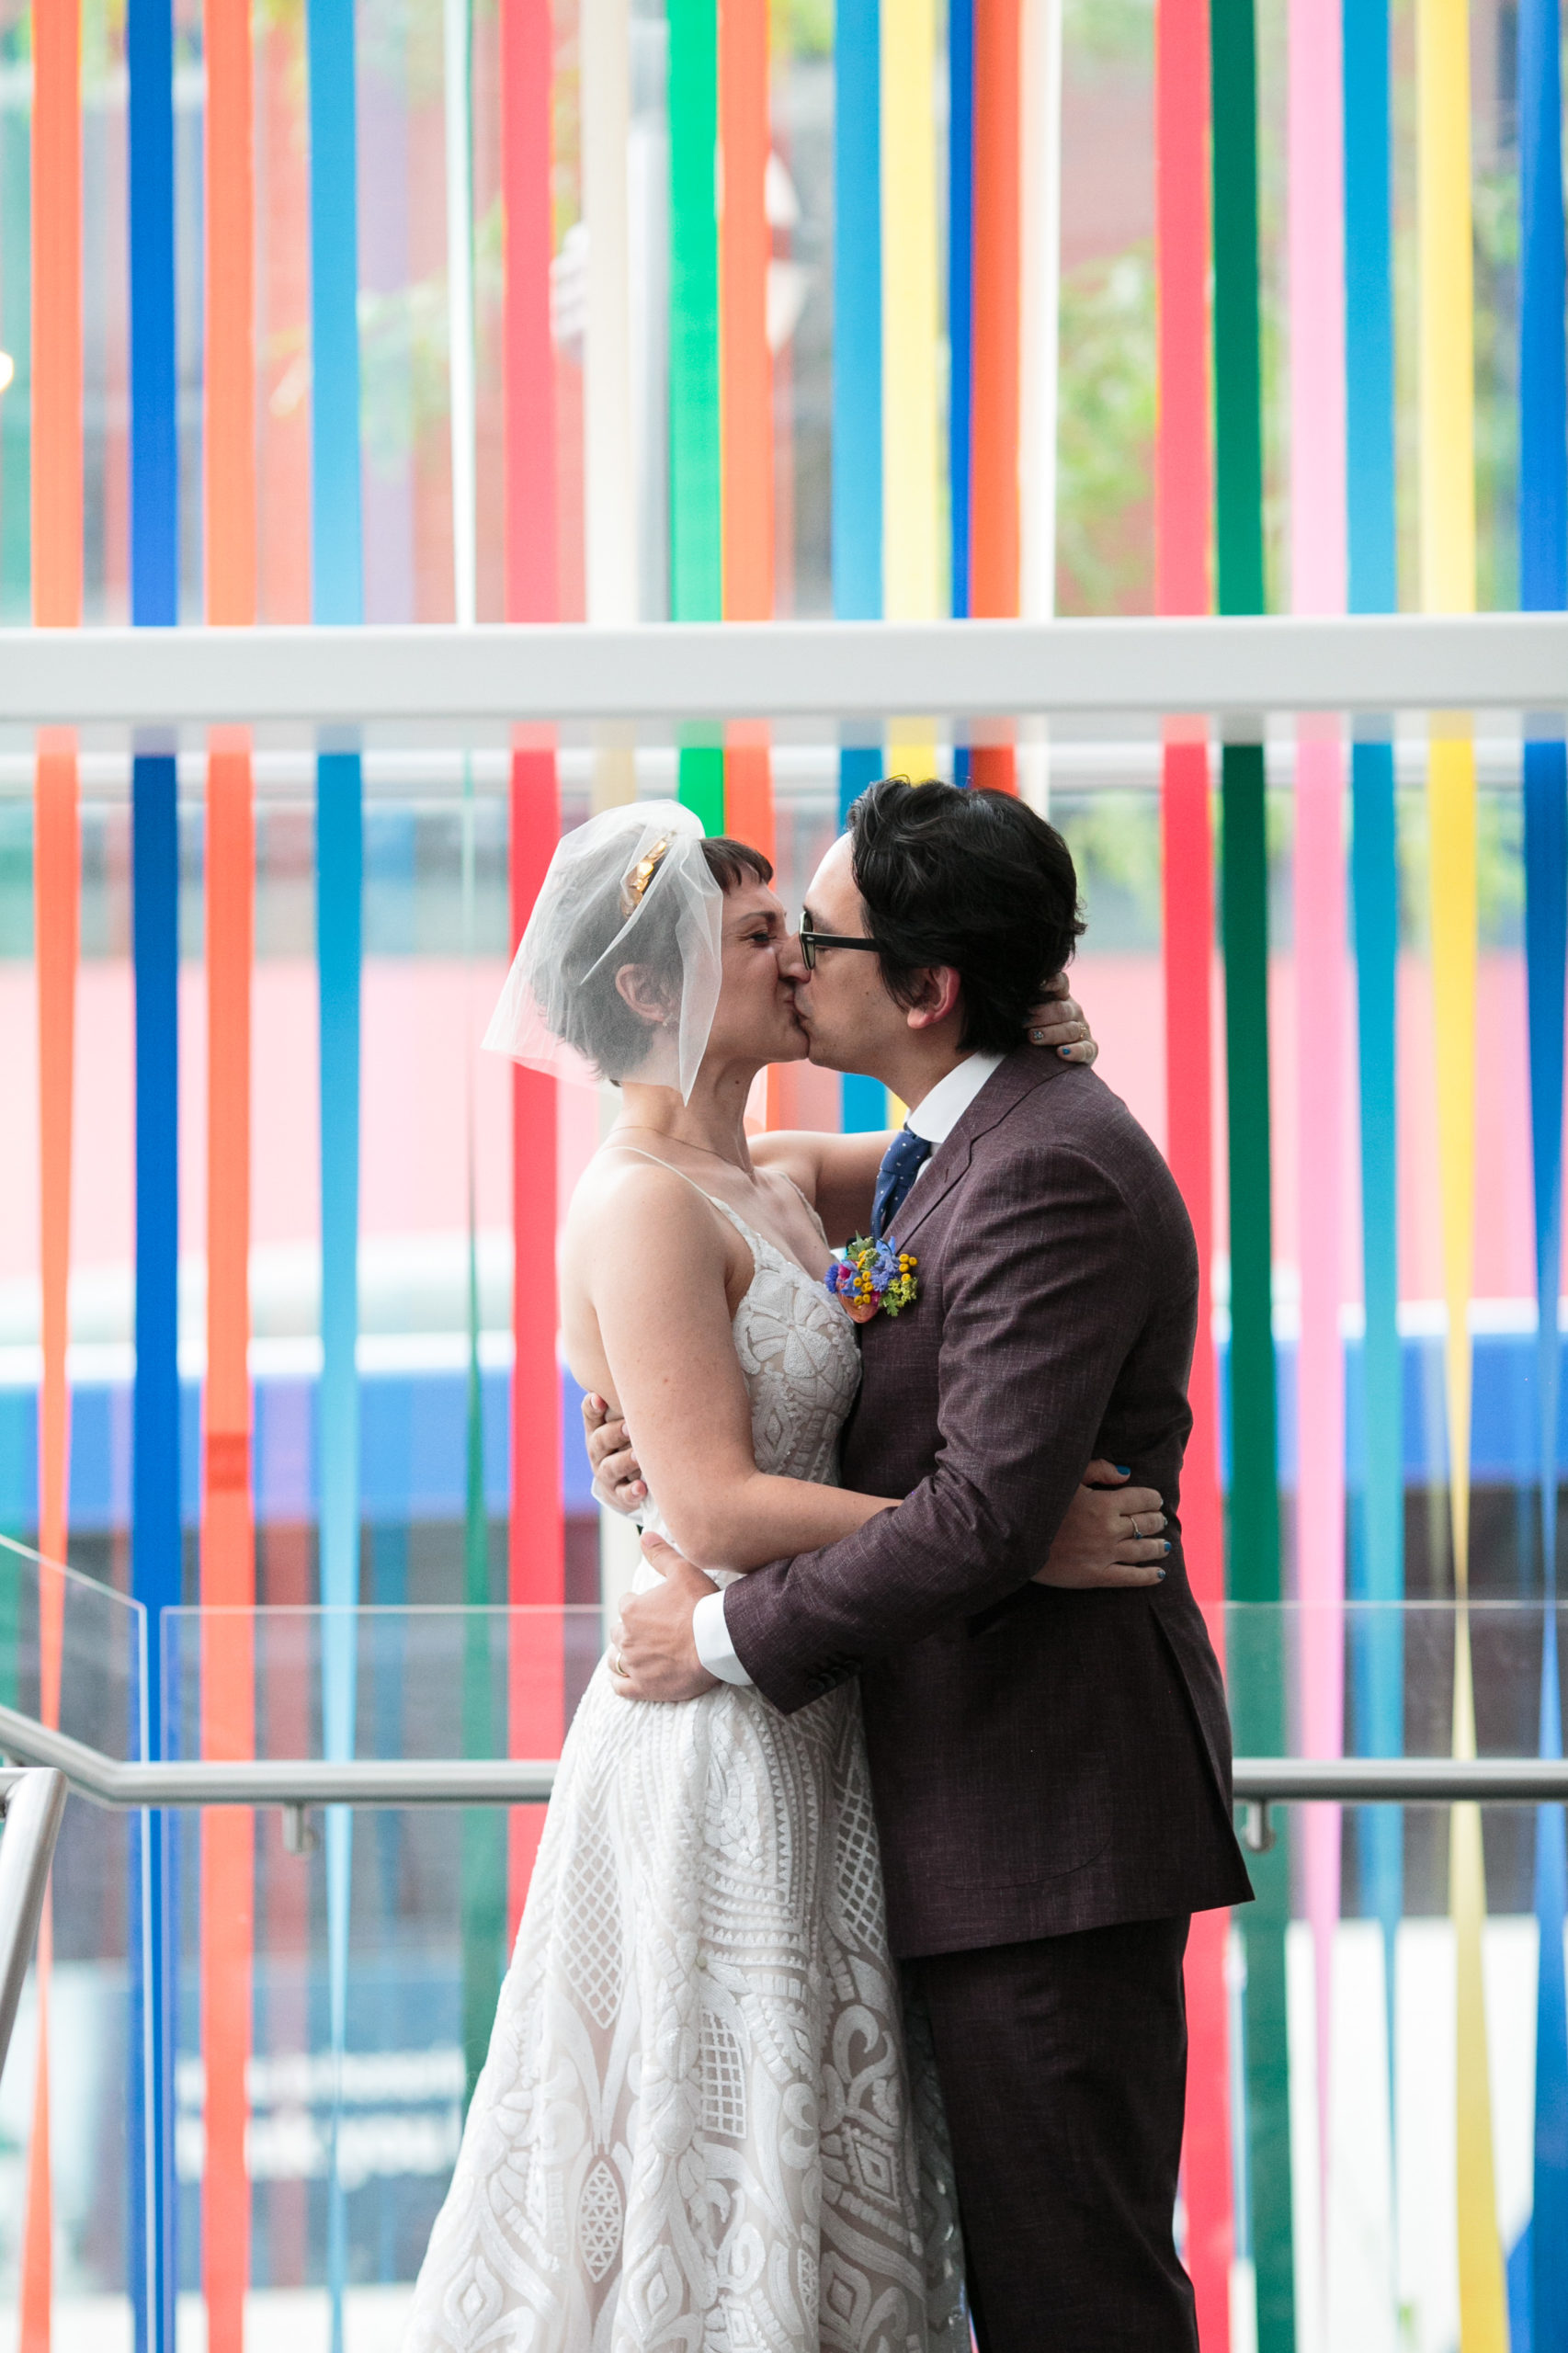 Toni & Steven's Colorful and Modern City Wedding 